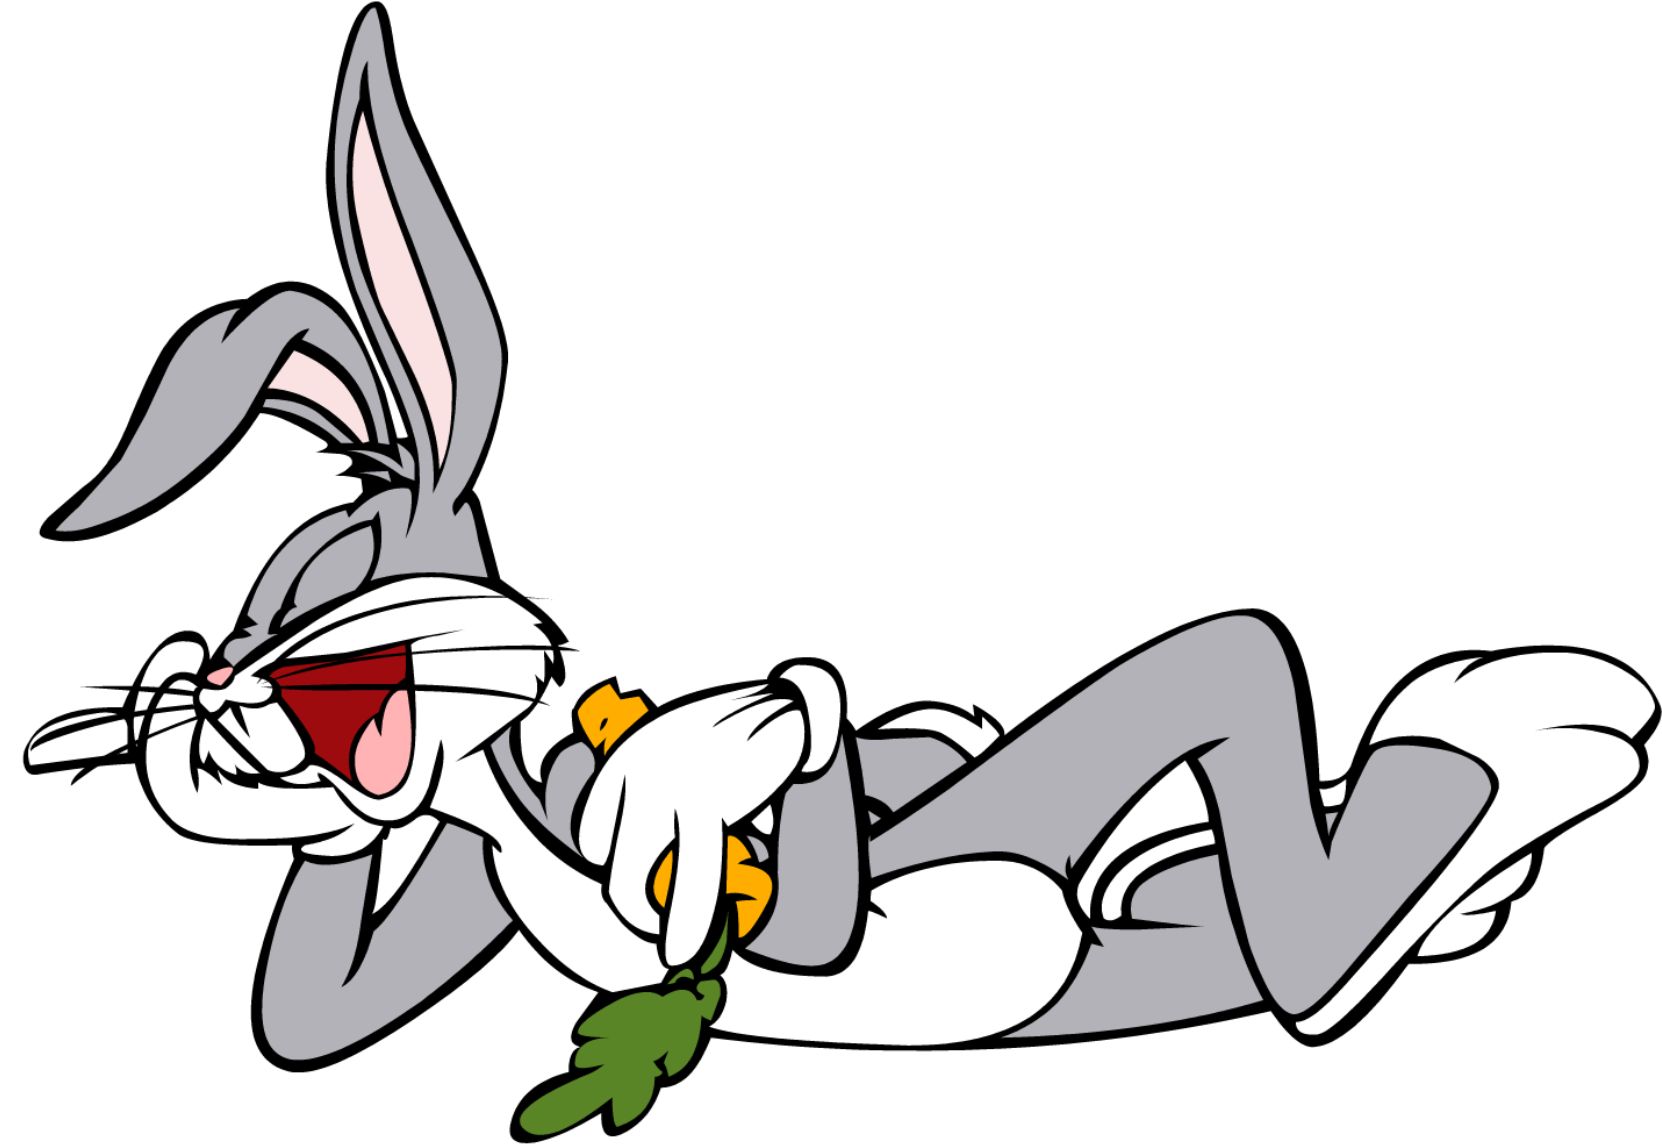 Bugs Bunny Clipart craft projects, Cartoons Clipart - Clipartoons